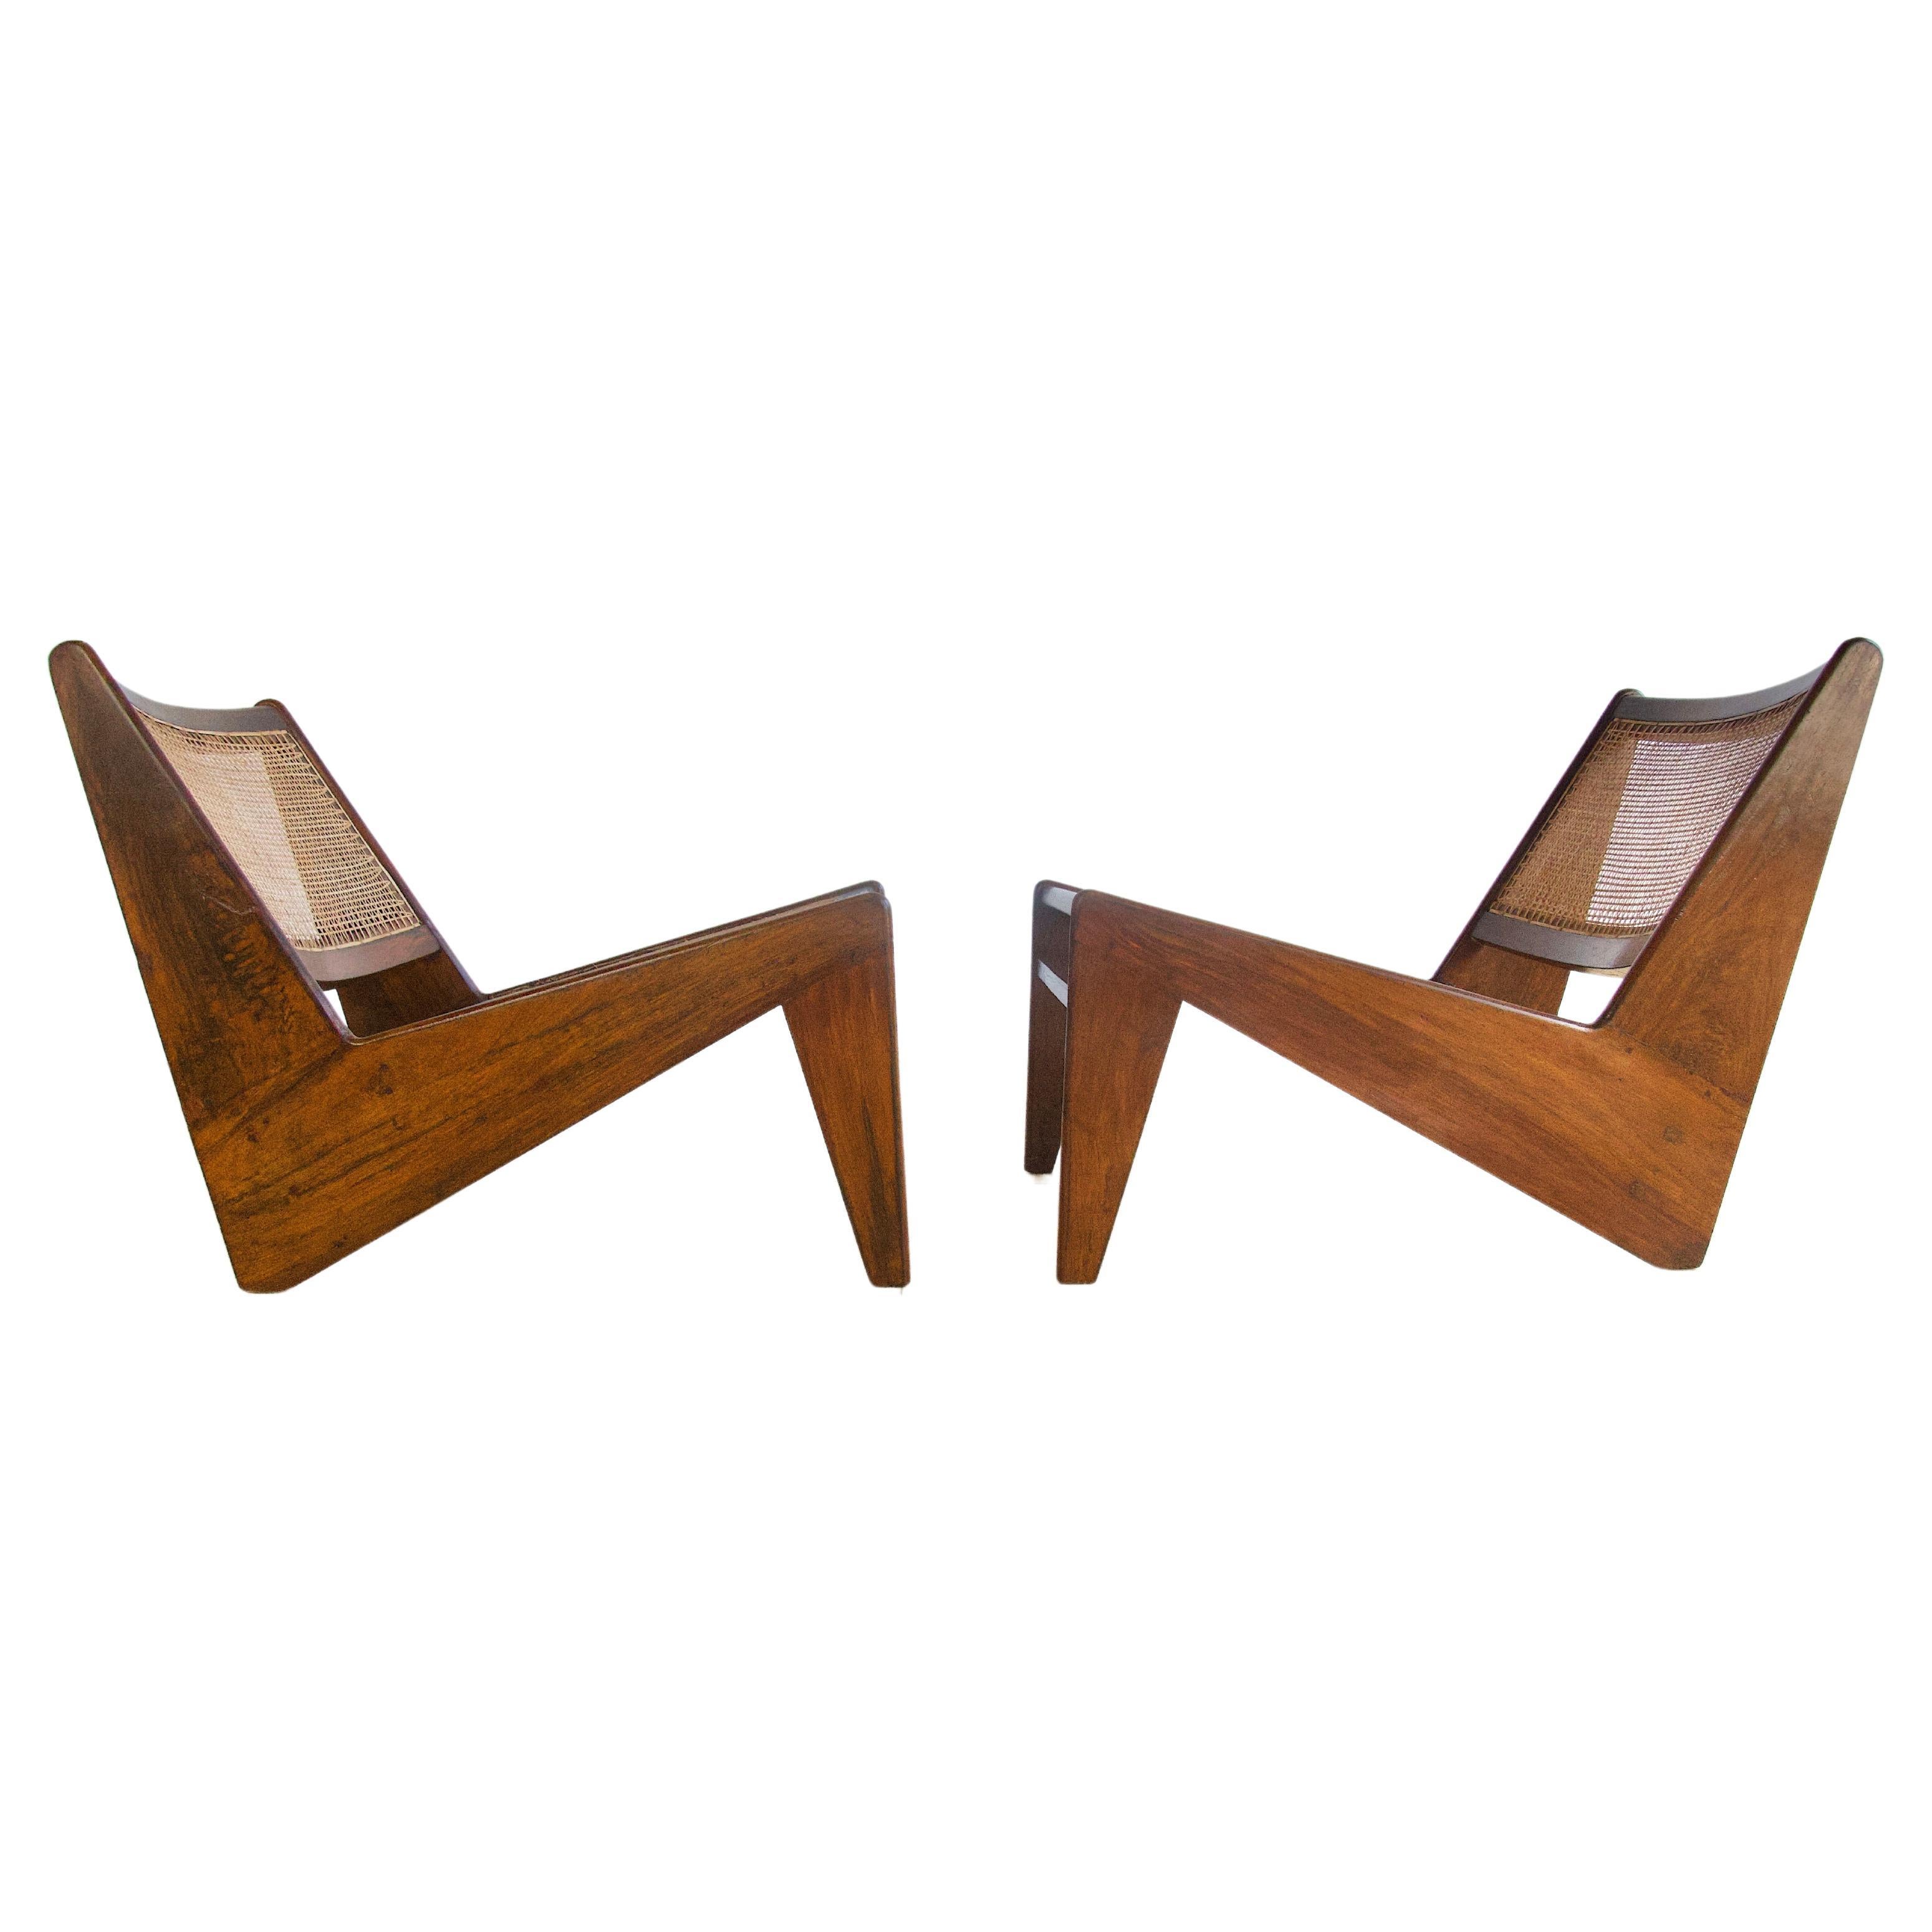 Rare Set of Pierre Jeanneret Kangaroo Chairs  For Sale